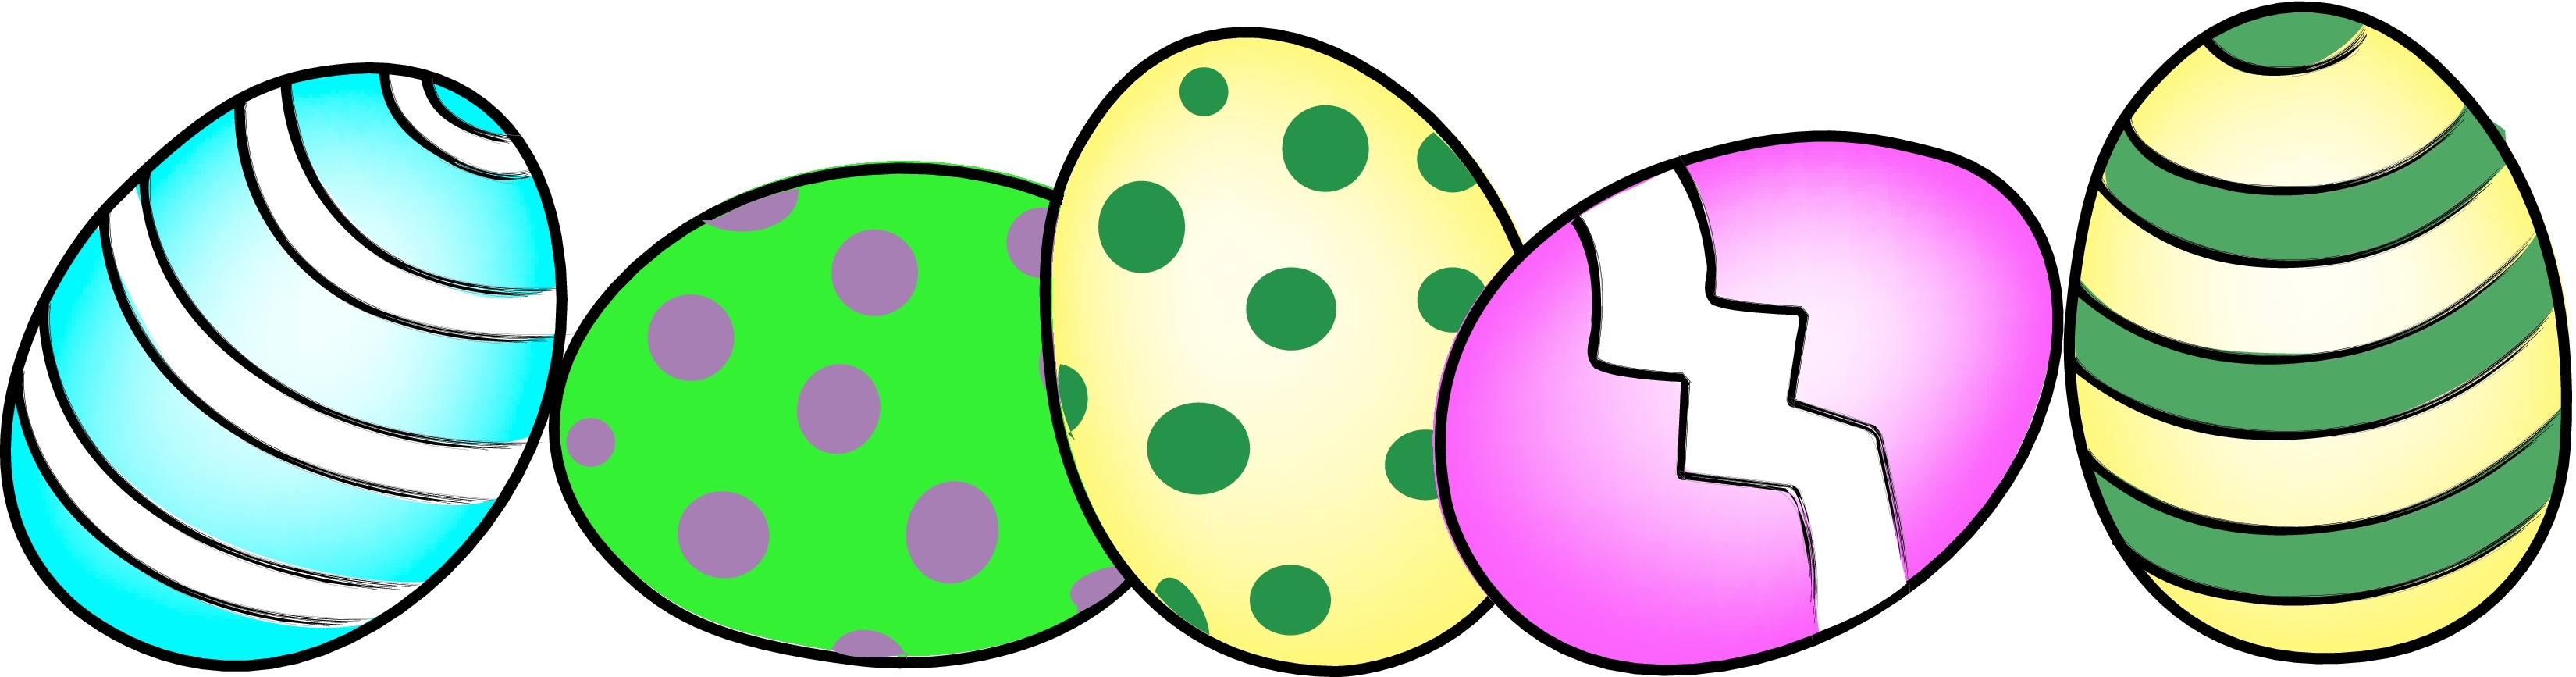 2018 clipart easter egg. New collection digital coloring